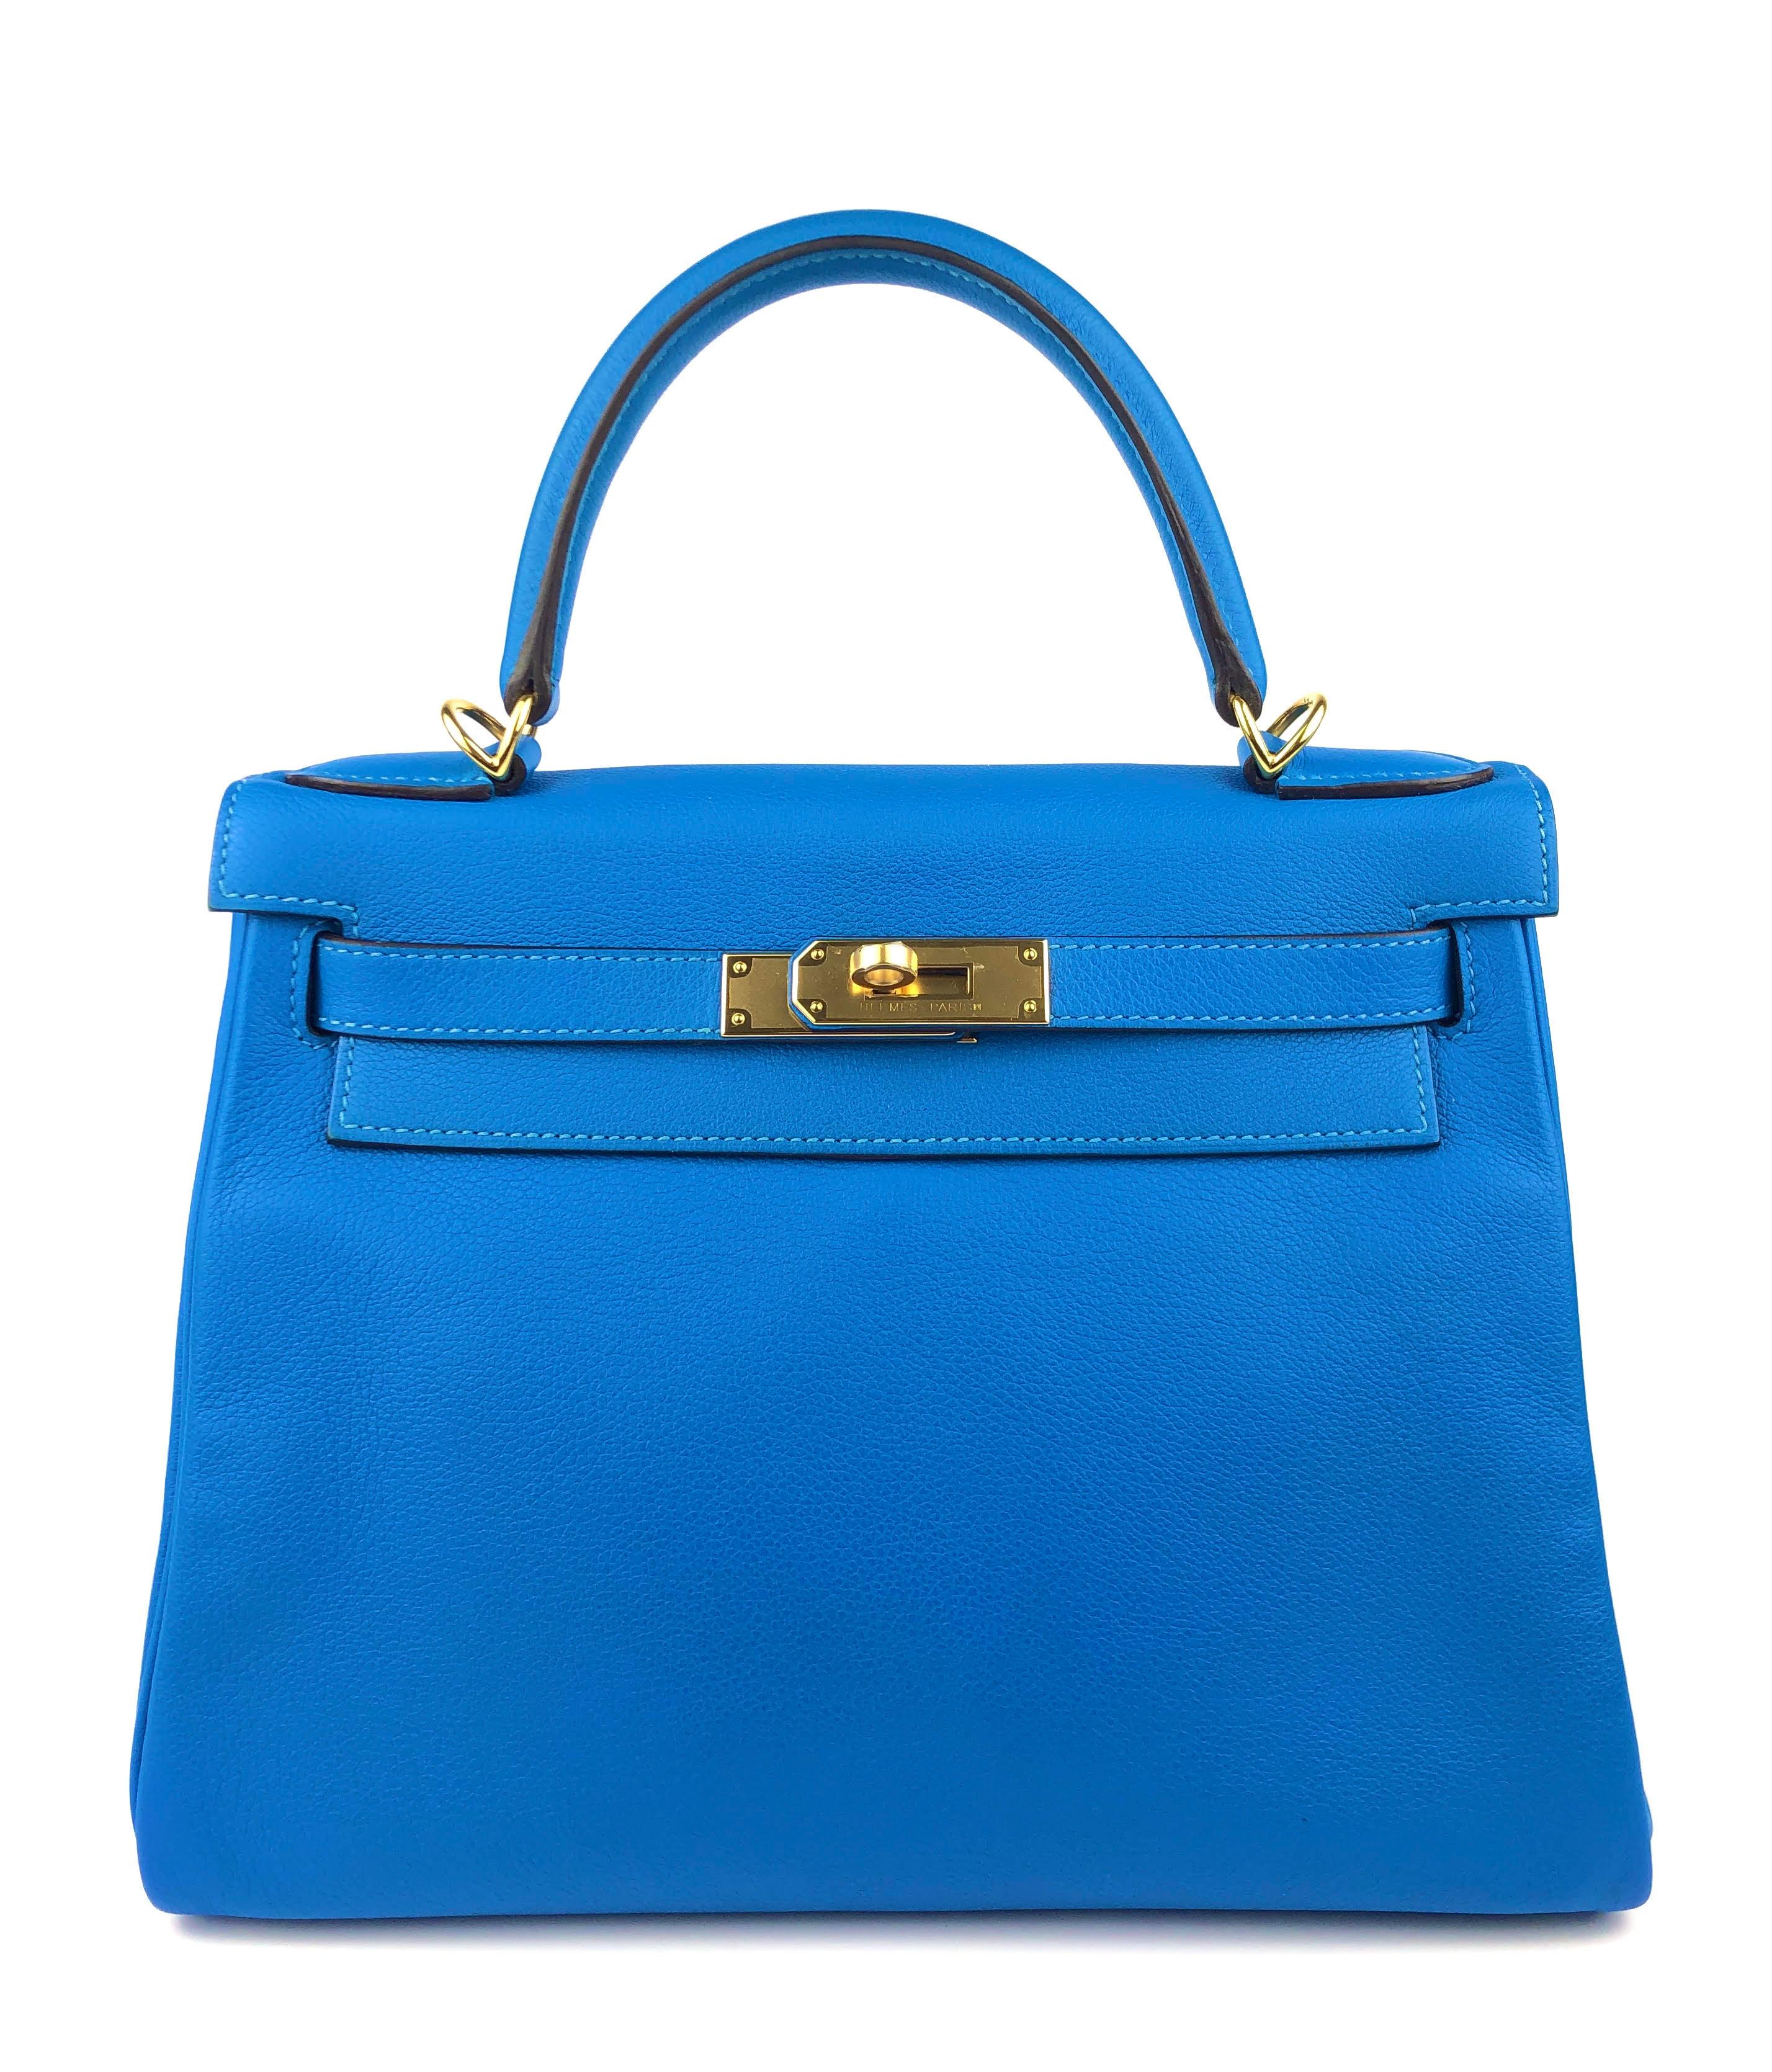 This authentic Hermès Intense Blue Evercolor 28 cm Kelly is in pristine condition with the protective plastic intact on the hardware.     Hermès bags are considered the ultimate luxury item worldwide.  Each piece is handcrafted with waitlists that